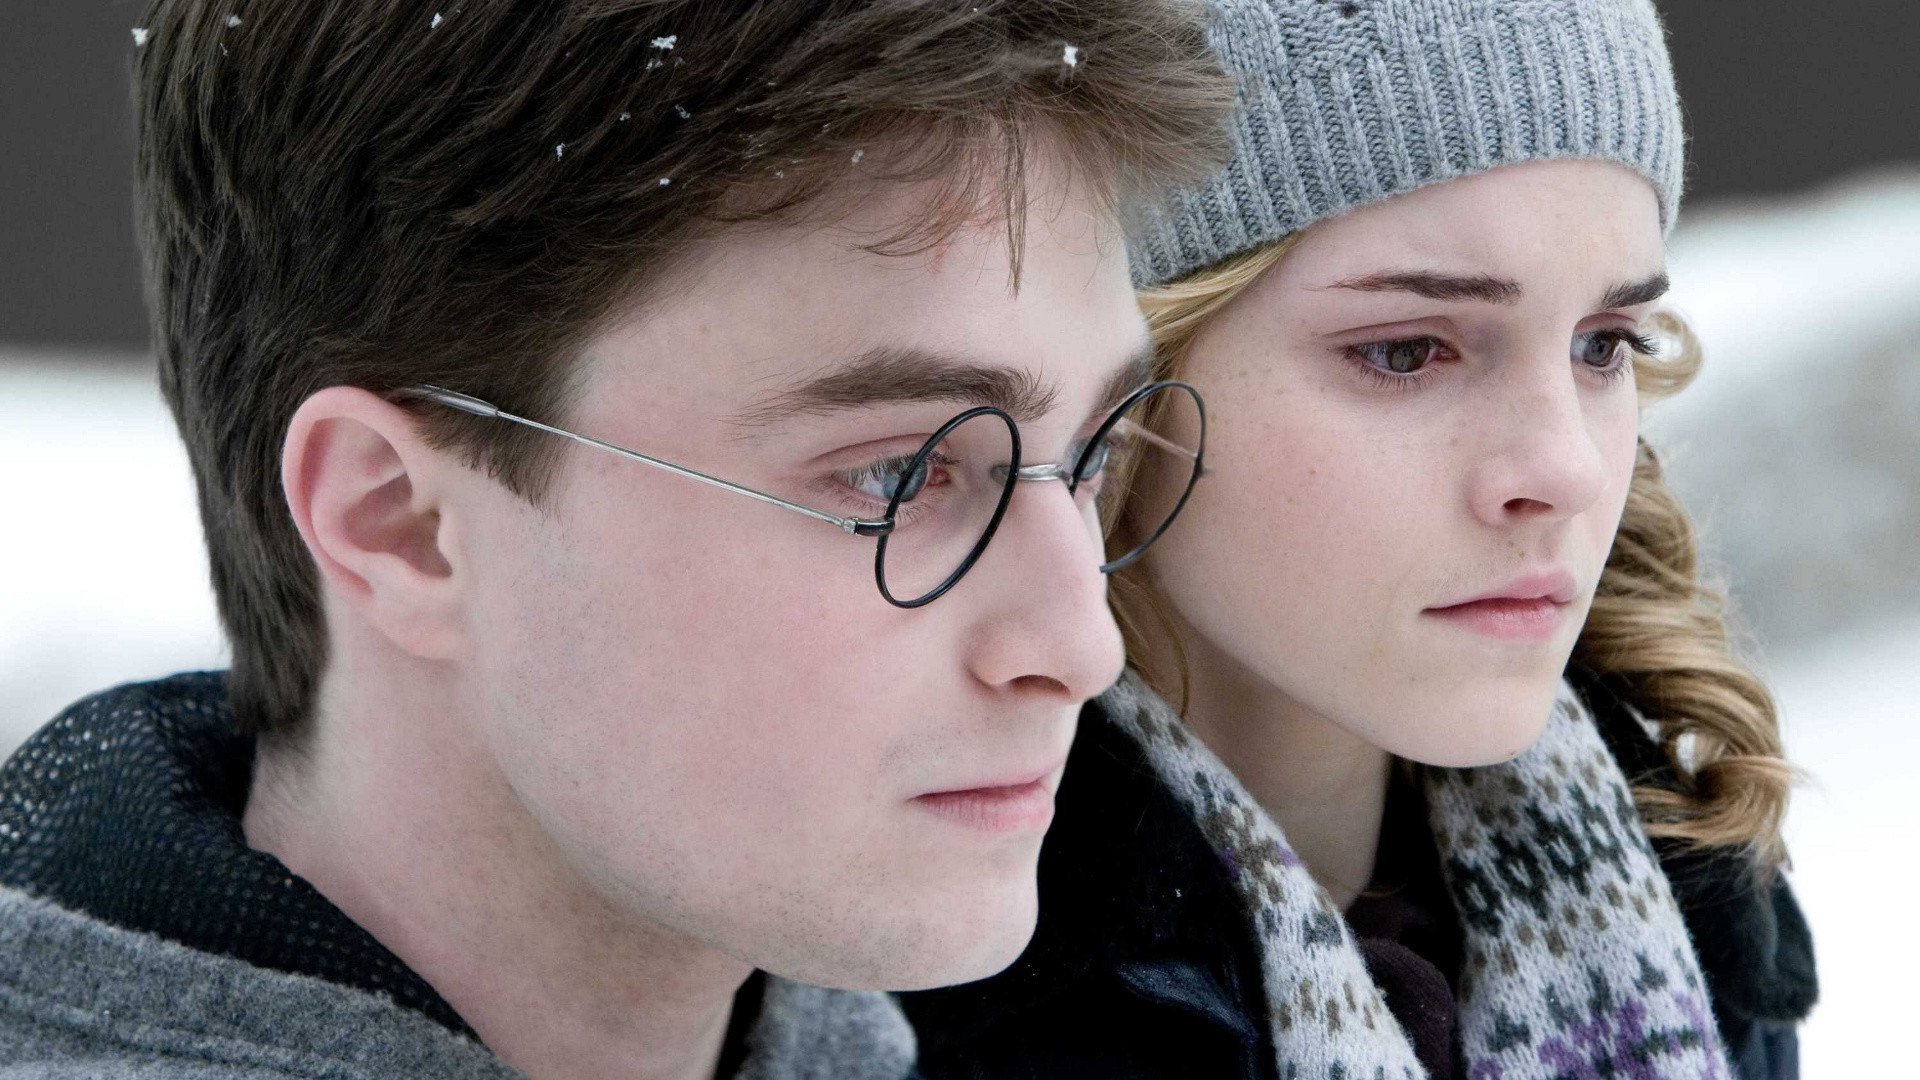 harry potter, movie, harry potter and the half blood prince, daniel radcliffe, emma watson, hermione granger